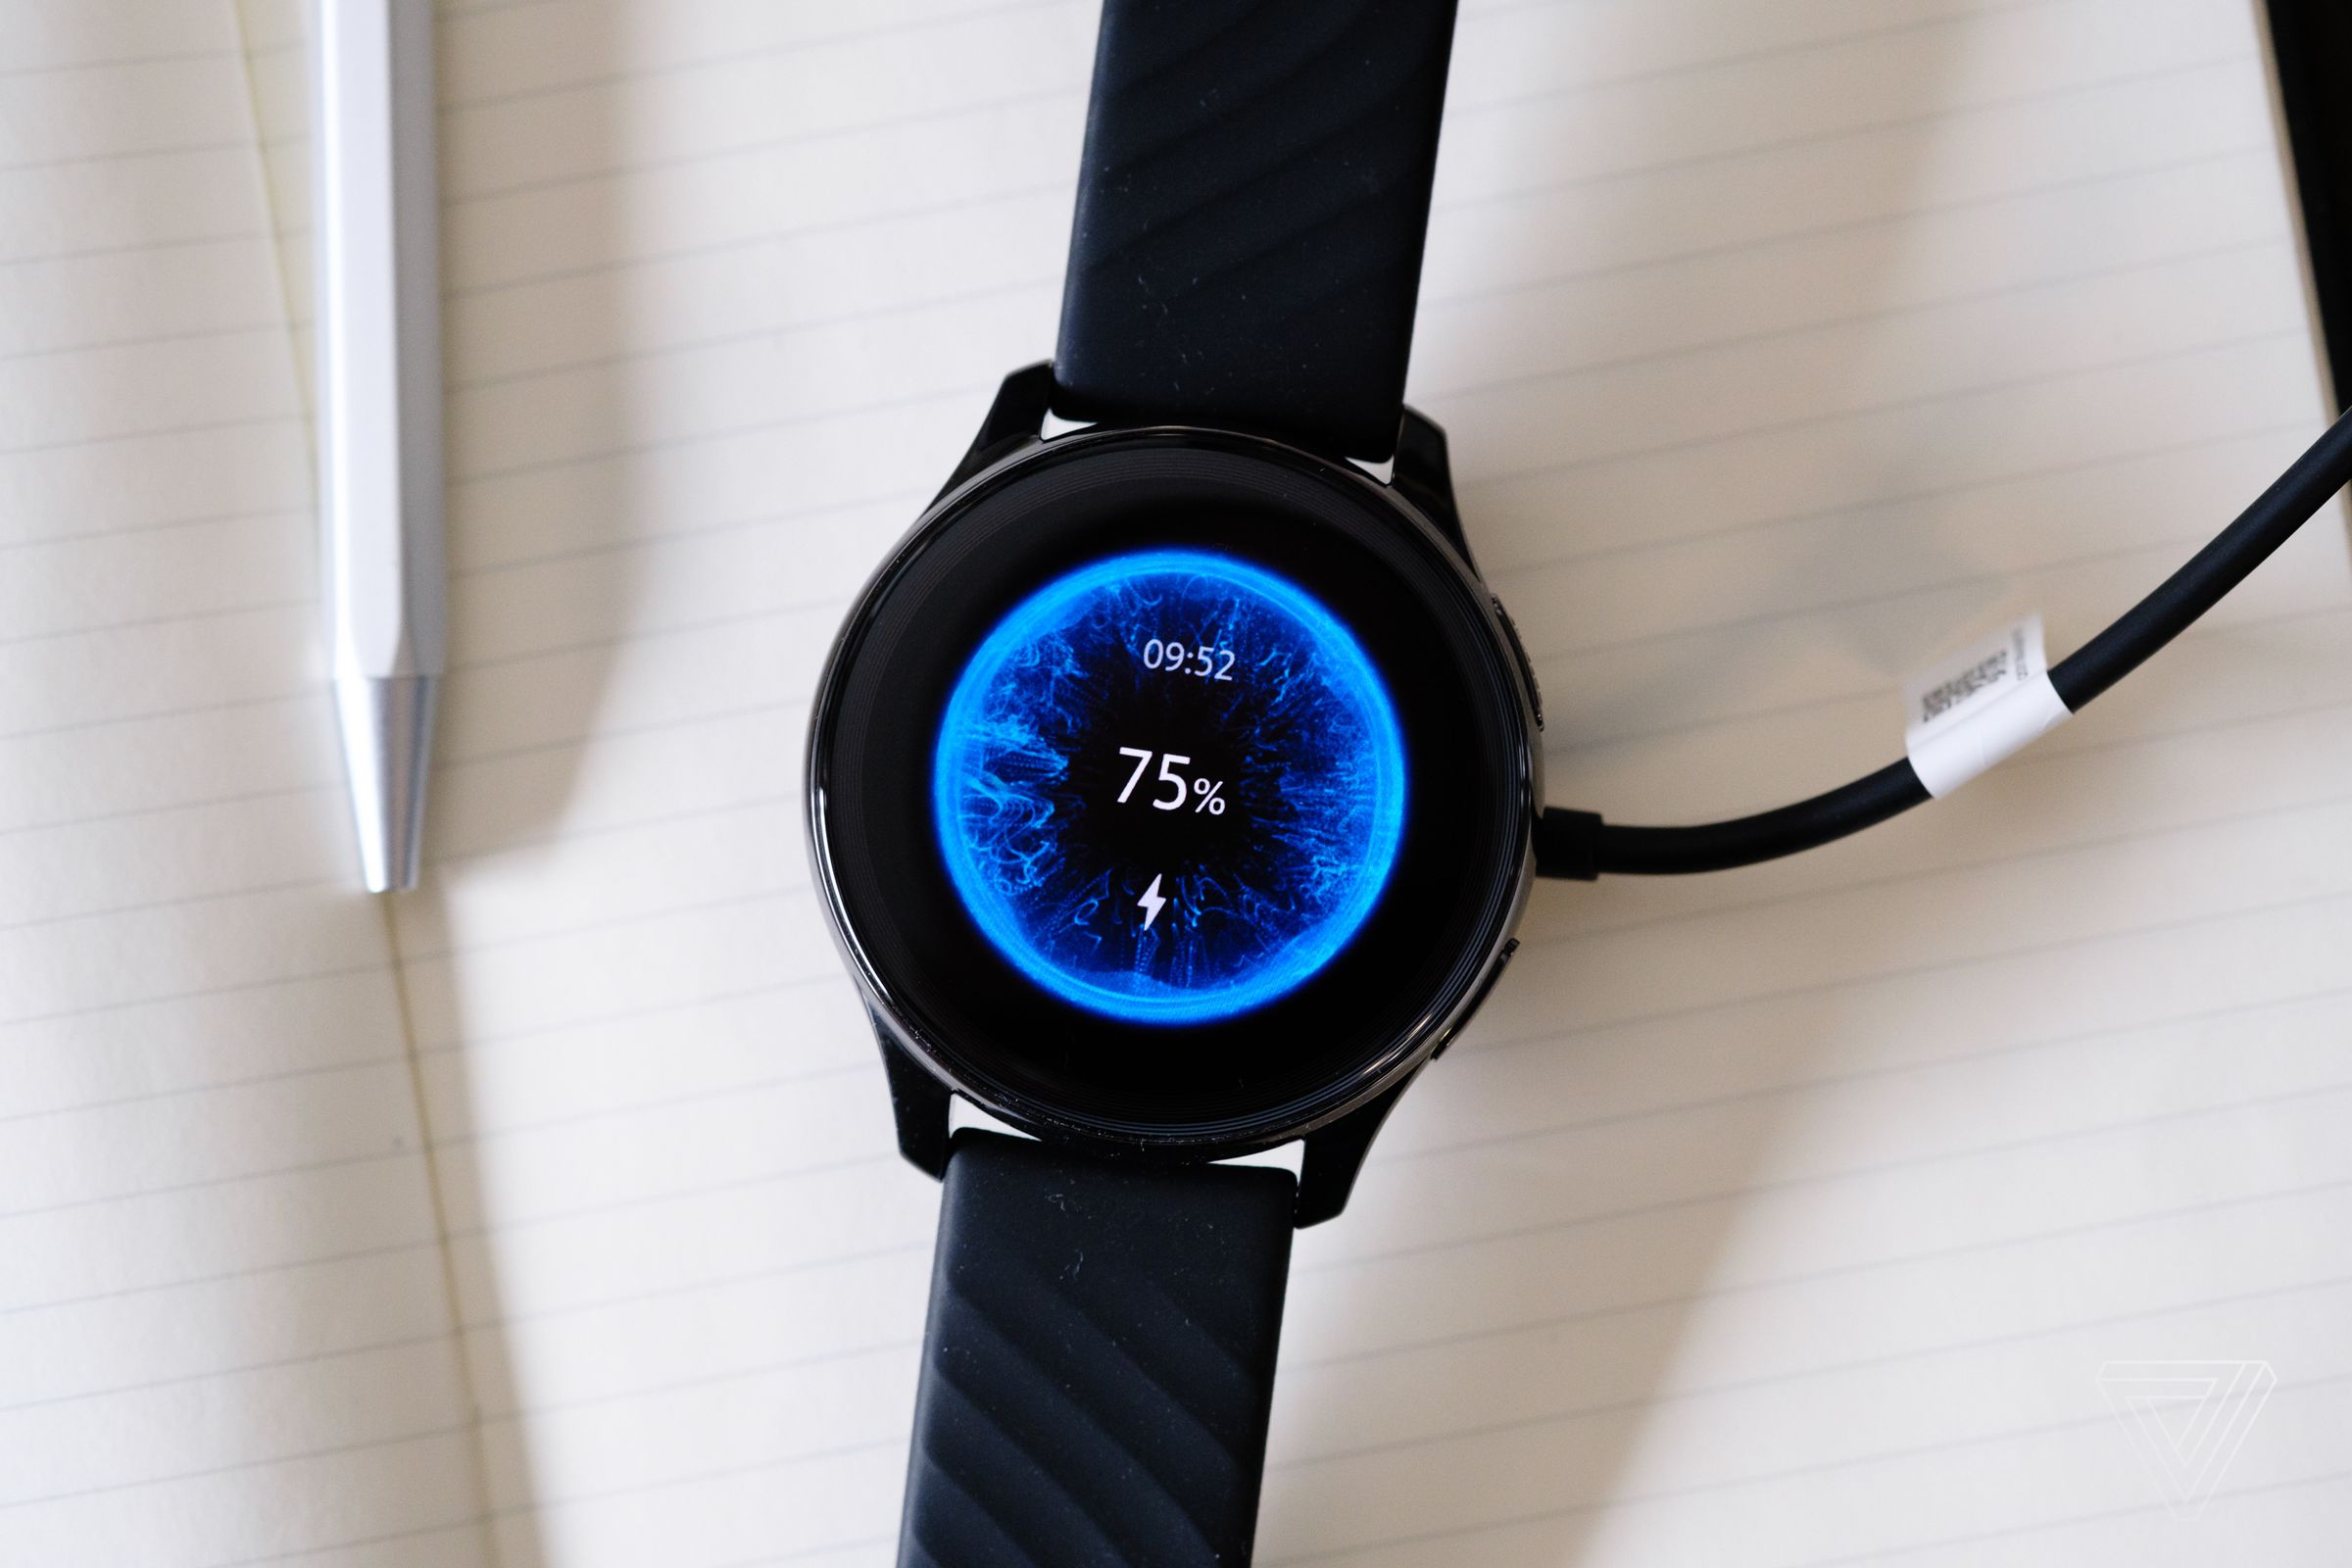 The OnePlus Watch has exceptional battery life and charges very quickly on its included charger.